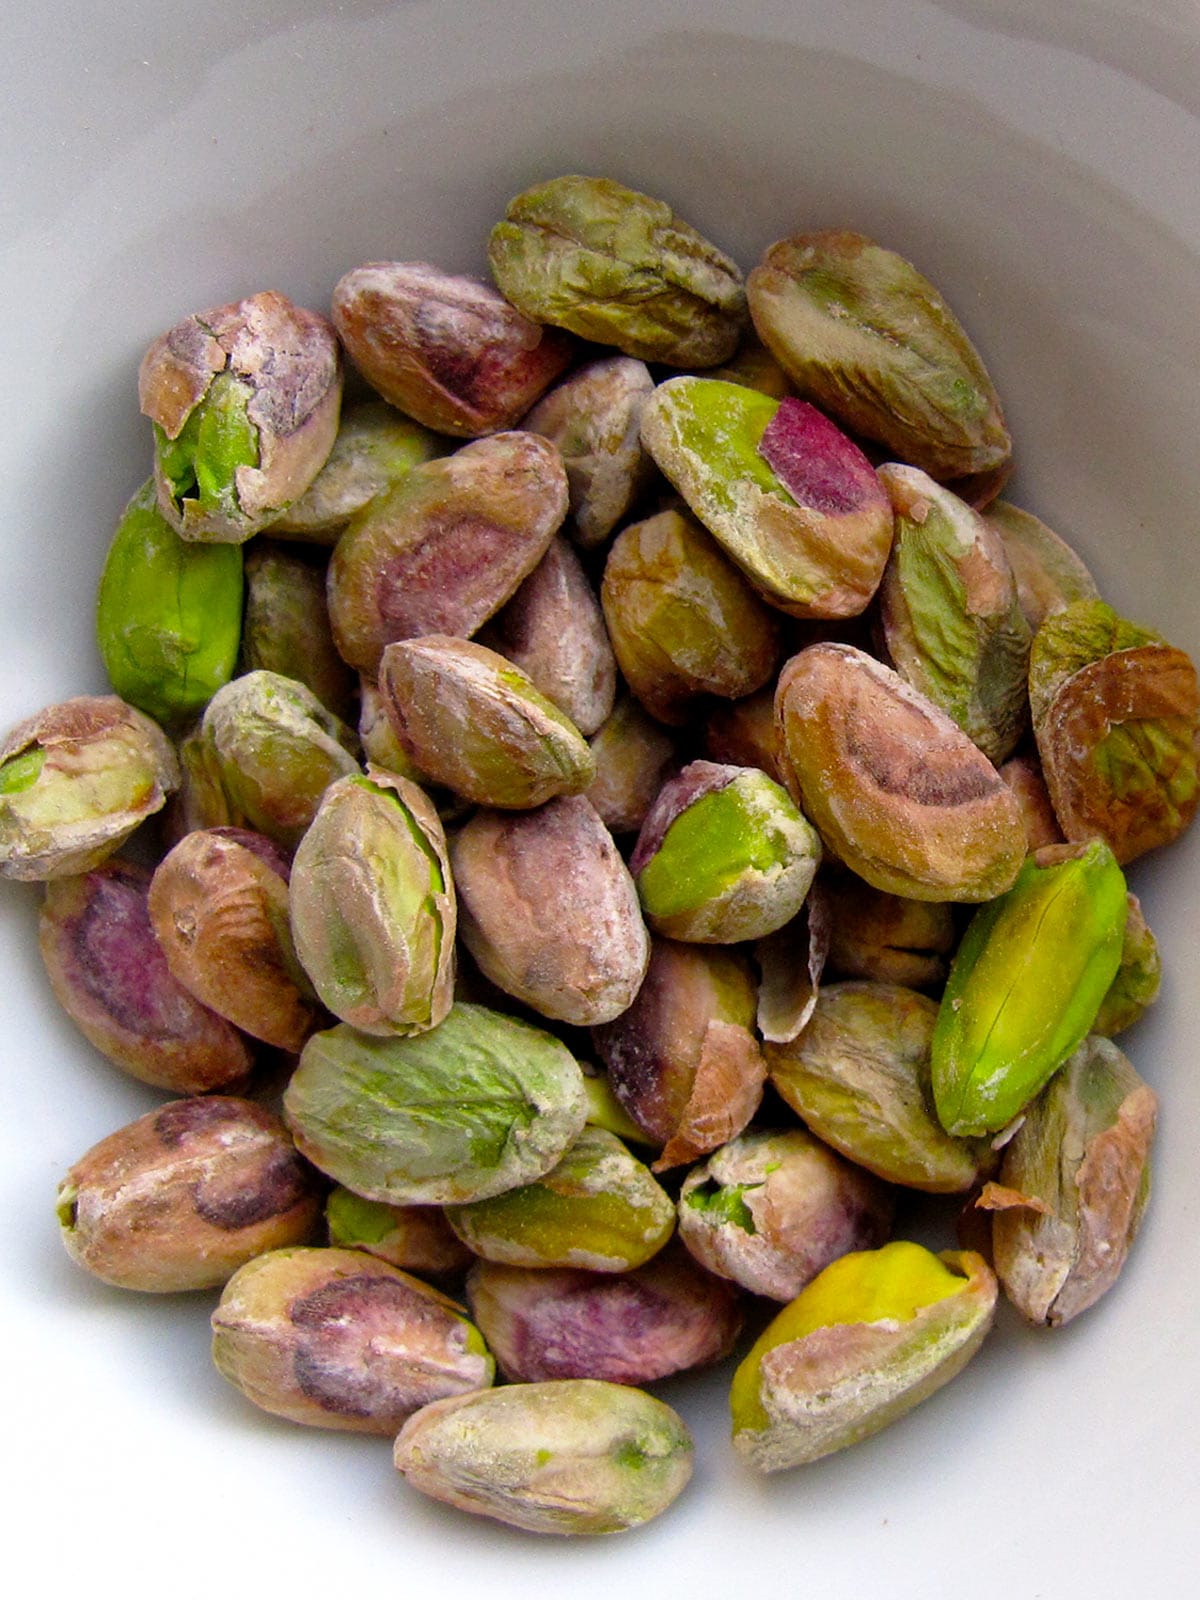 Pistachios in a white bowl.